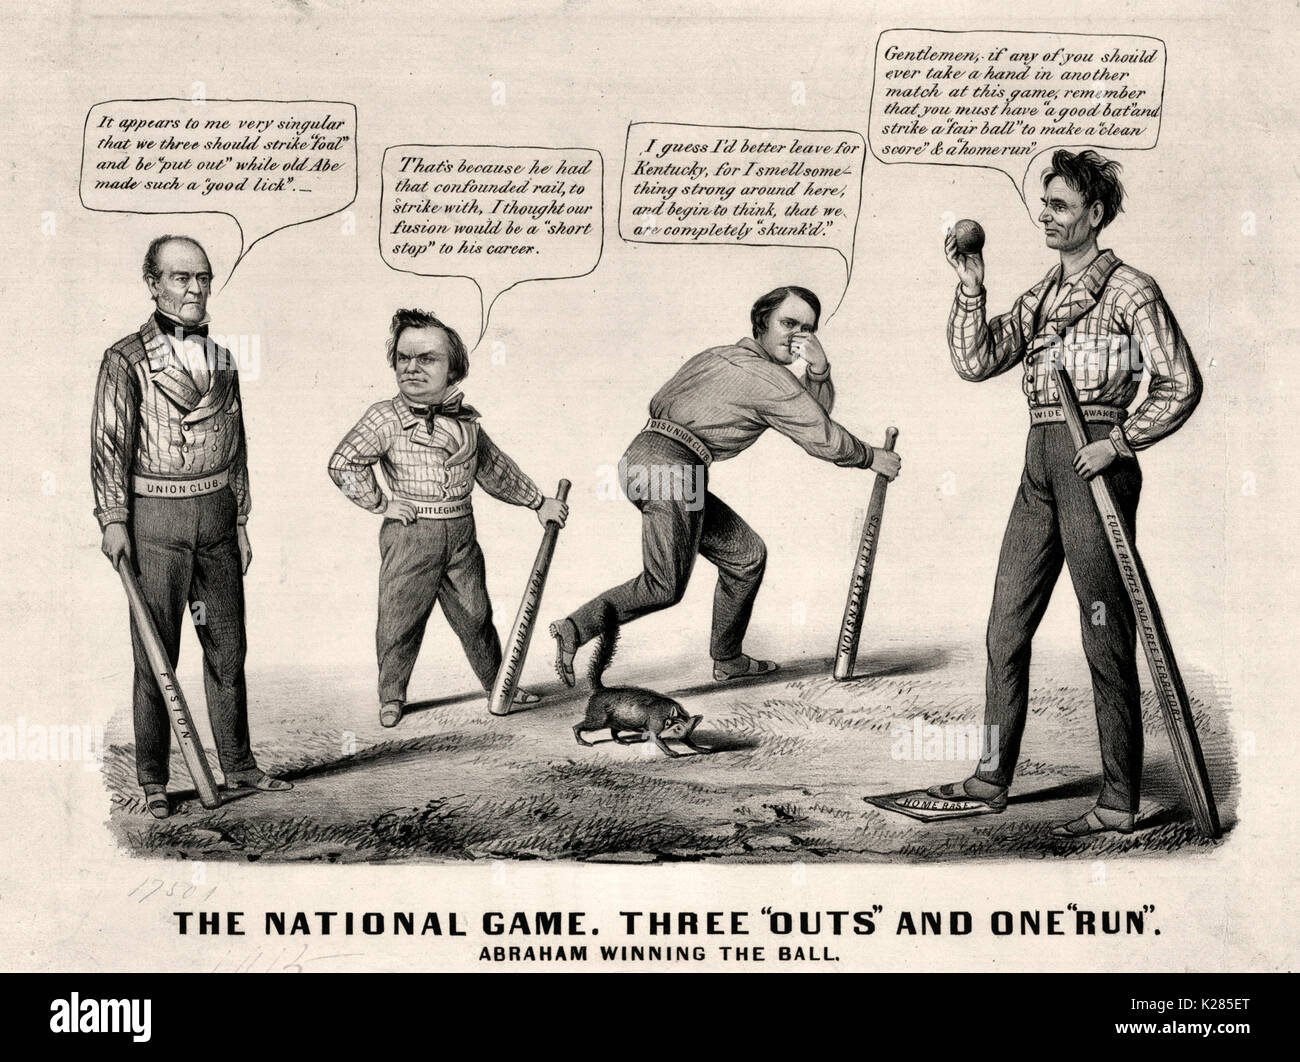 The national game. Three 'outs' and one 'run' - Political Cartoon, September, 1860 -  A pro-Lincoln satire weeks before the 1860 presidential election. The contest is portrayed as a baseball game in which Lincoln has defeated (left to right) John Bell, Stephen A. Douglas, and John C. Breckinridge. Lincoln (right) stands with his foot on 'Home Base,' advising the others, 'Gentlemen, if any of you should ever take a hand in another match at this game, remember that you must have a good bat' and strike a fair ball' to make a clean score' & a home run.'' His 'good bat' is actually a wooden rail la Stock Photo